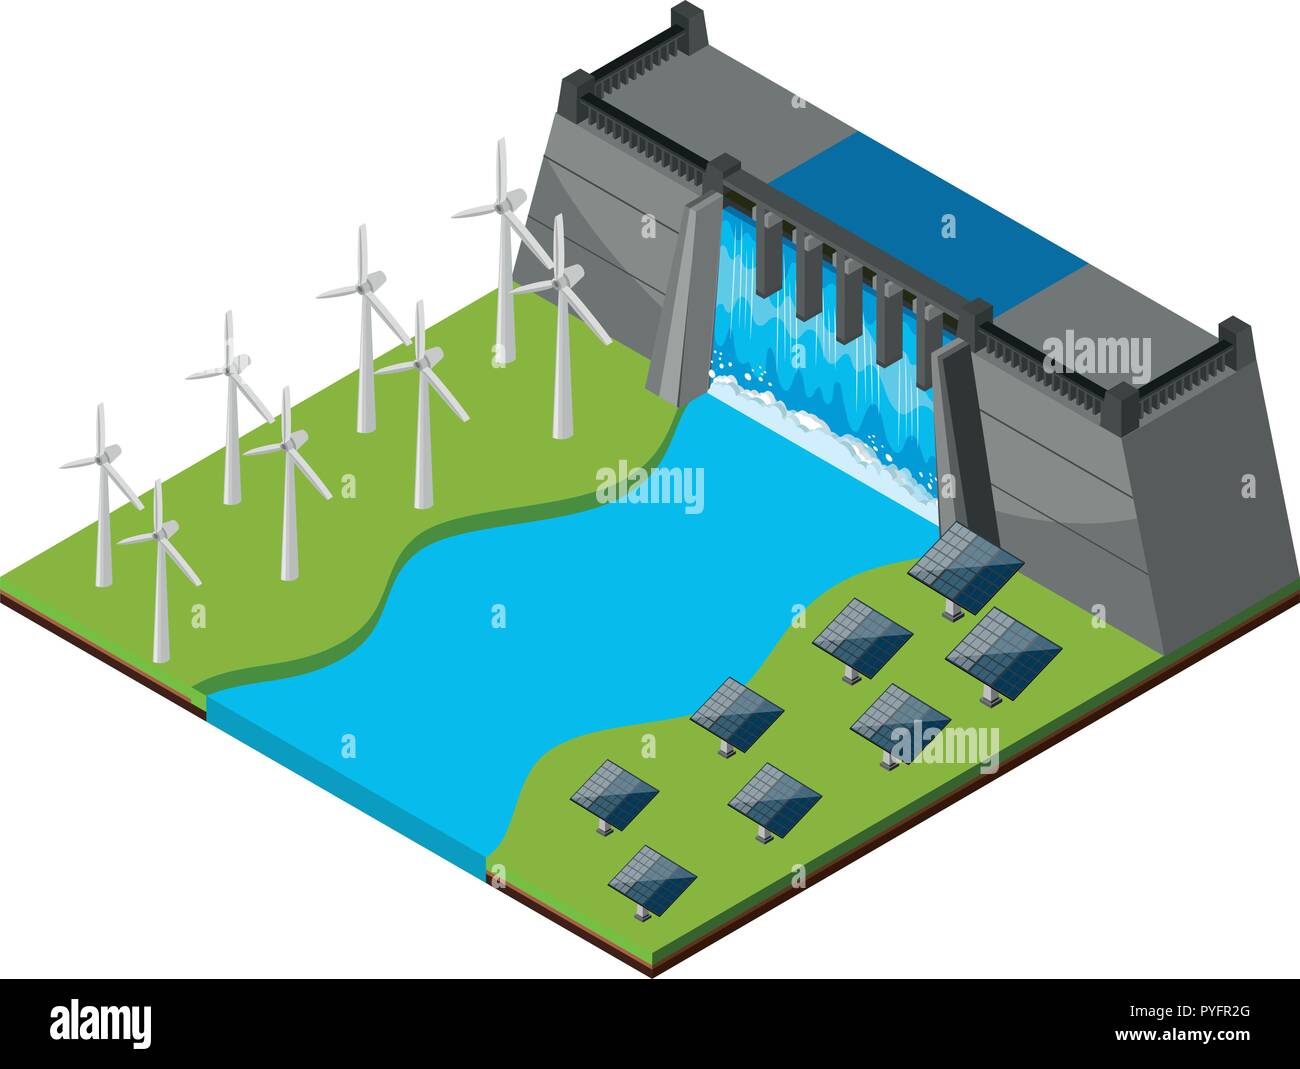 Dam with watergate and wind turbines illustration Stock Vector